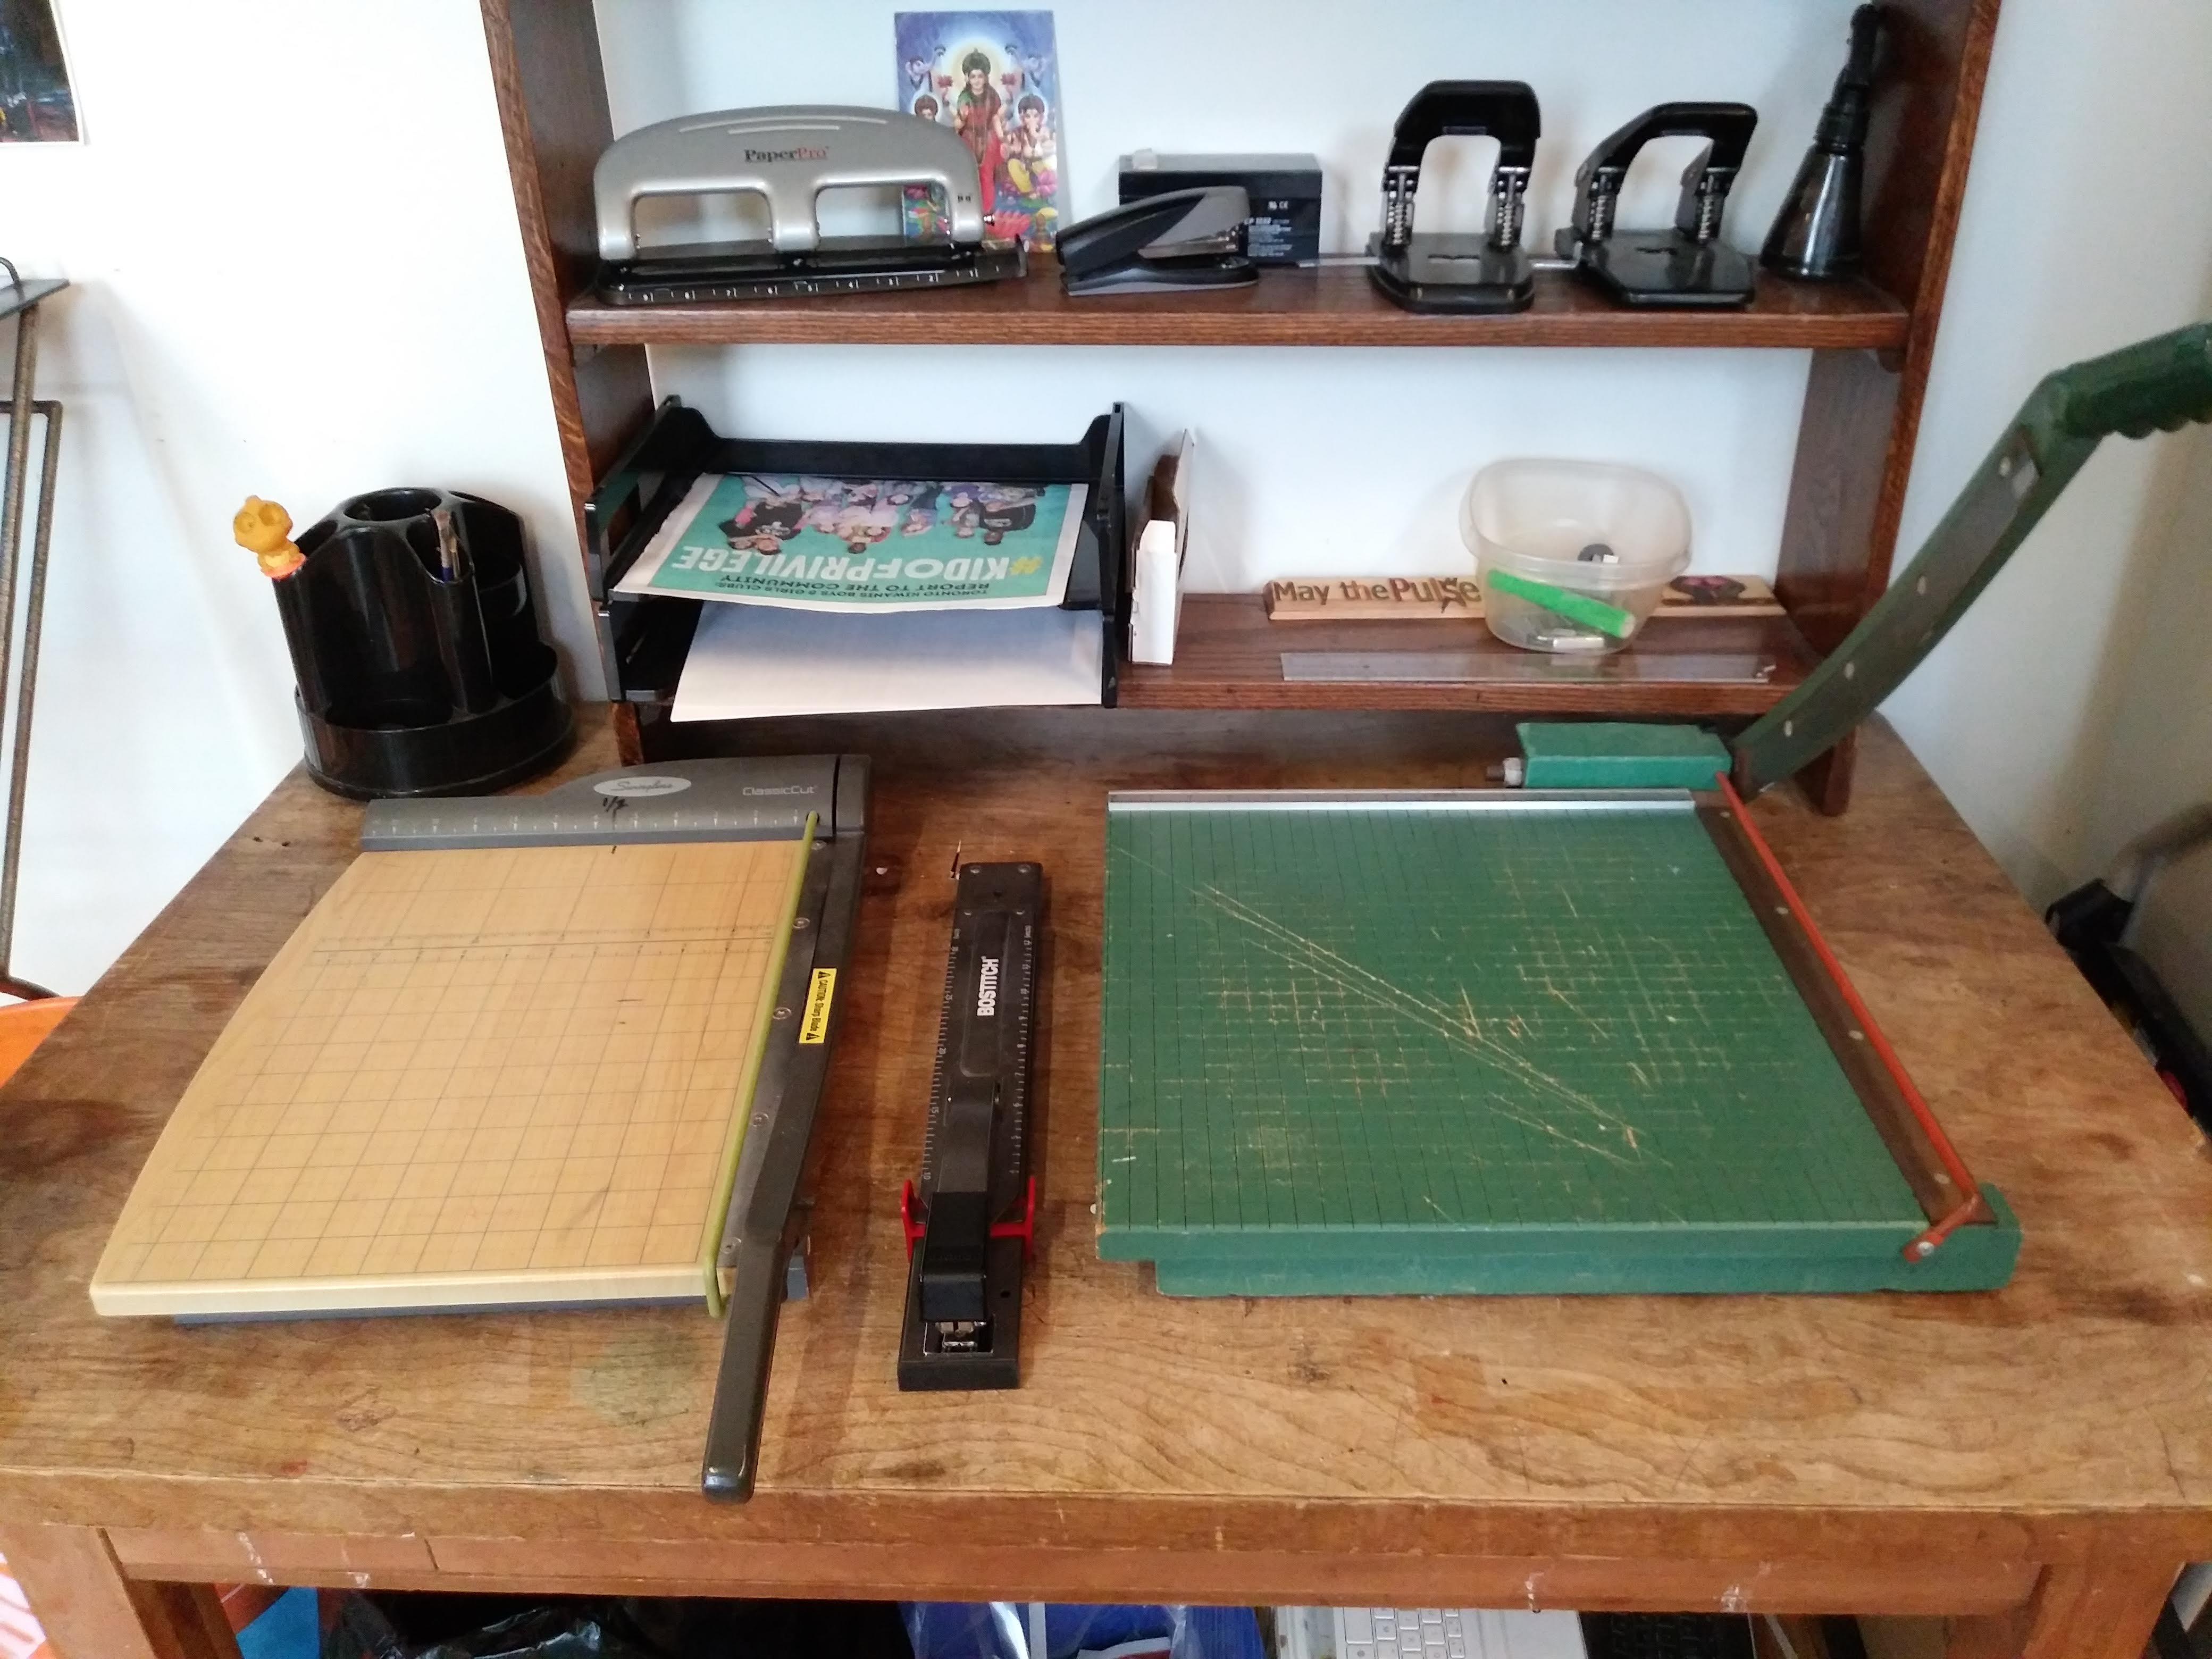 paper cutter and long arm stapler